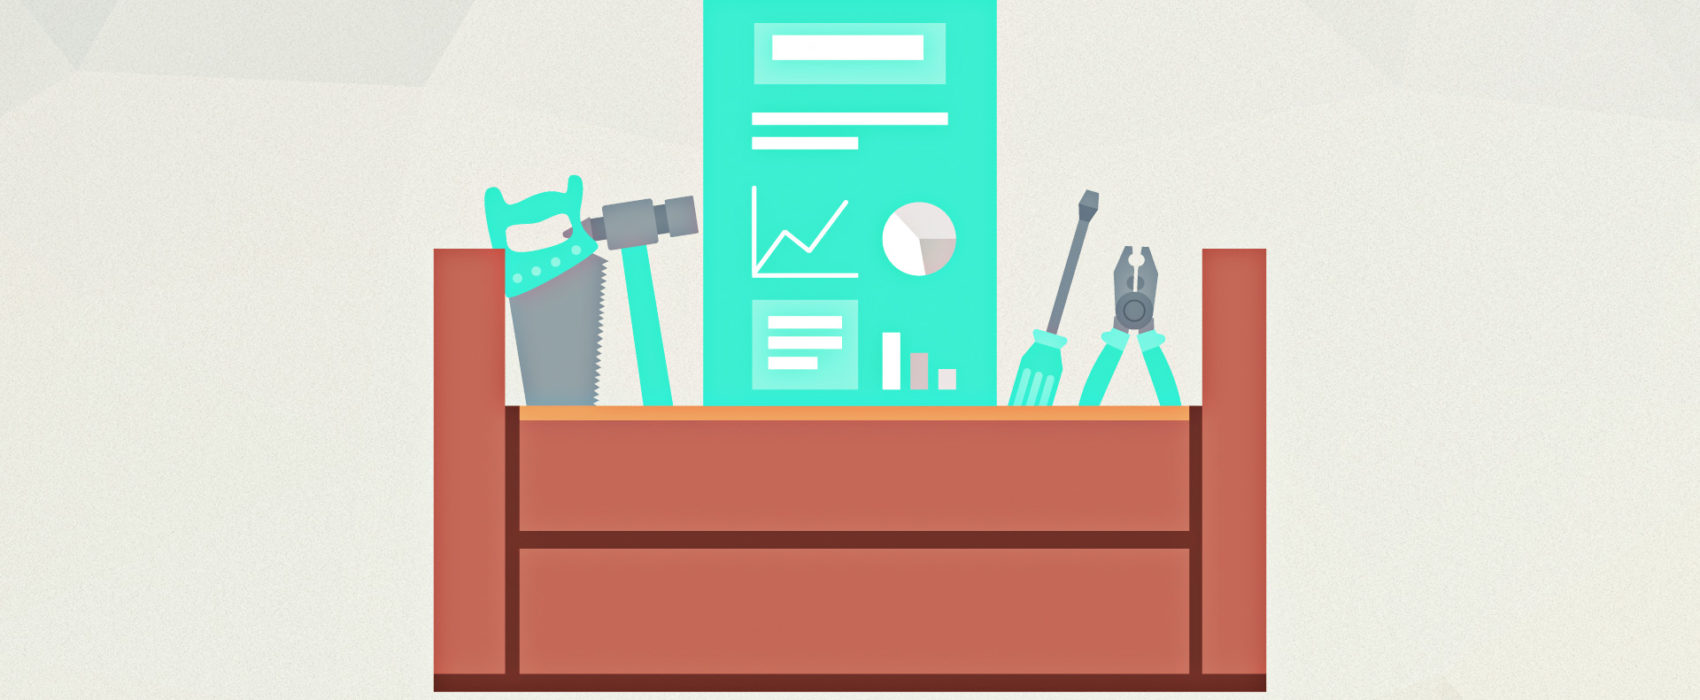 27 infographic tools and resources